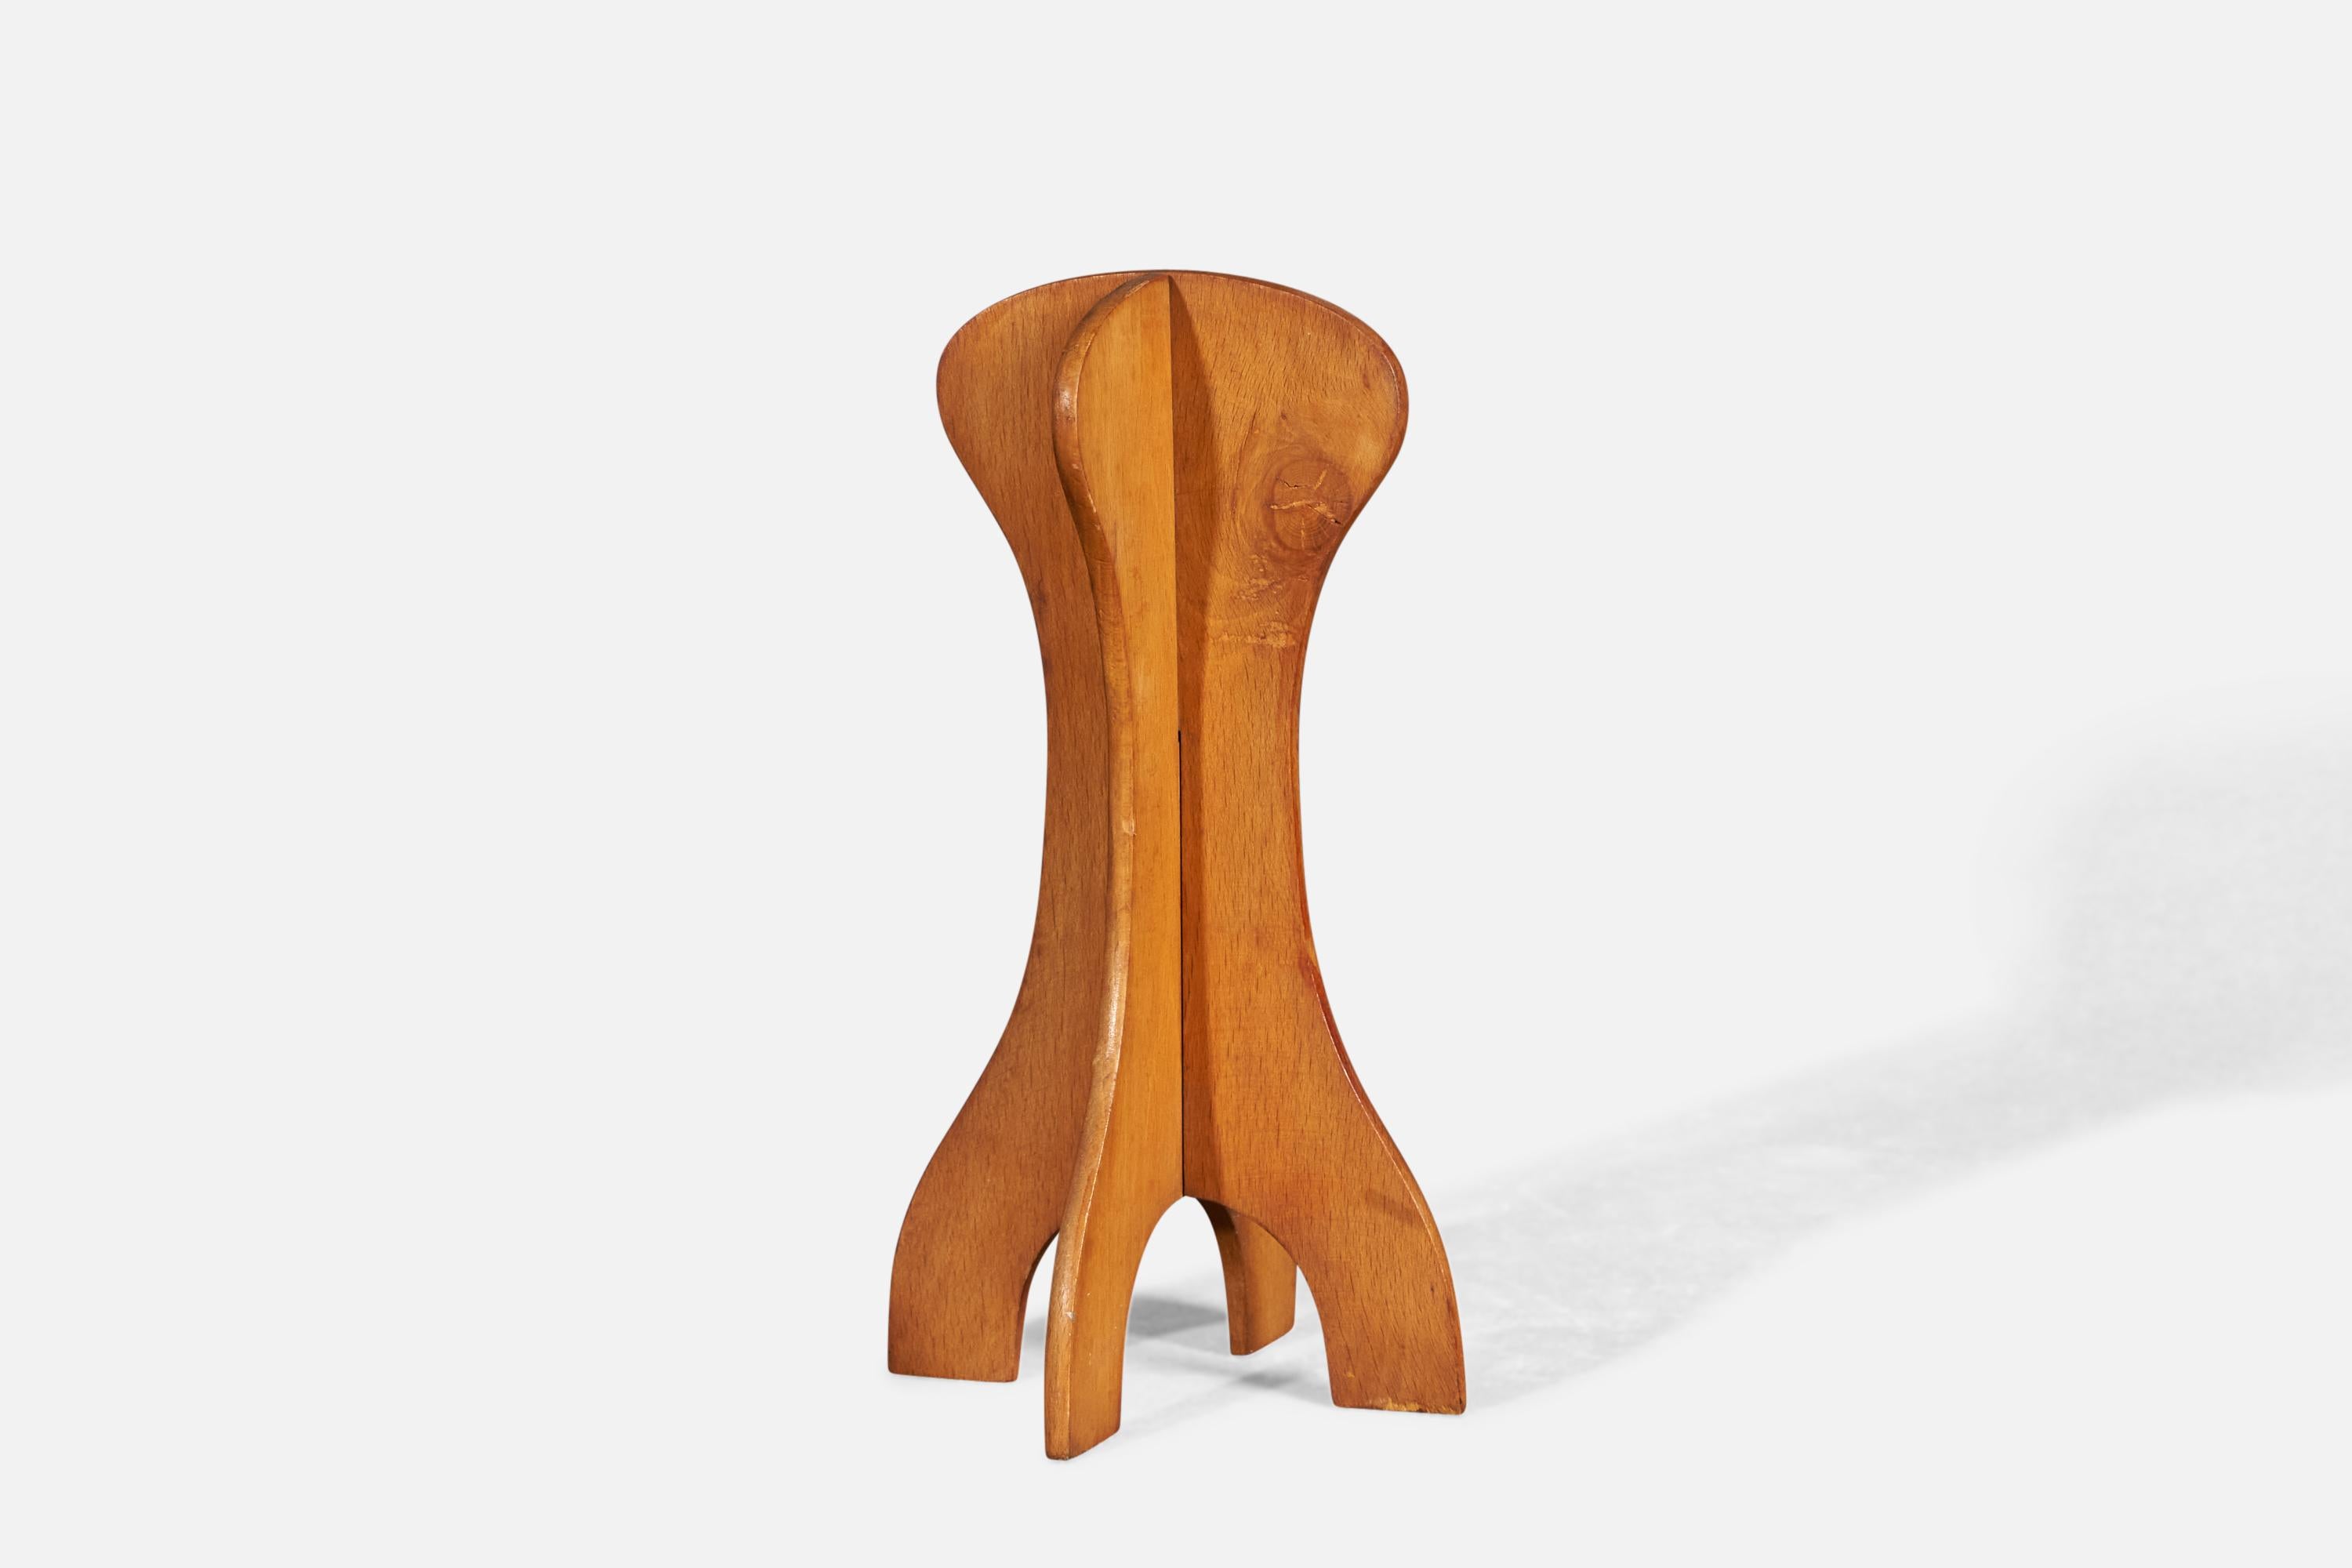 A set of 3 wooden hat stands, designed and produced in Italy, c. 1940s